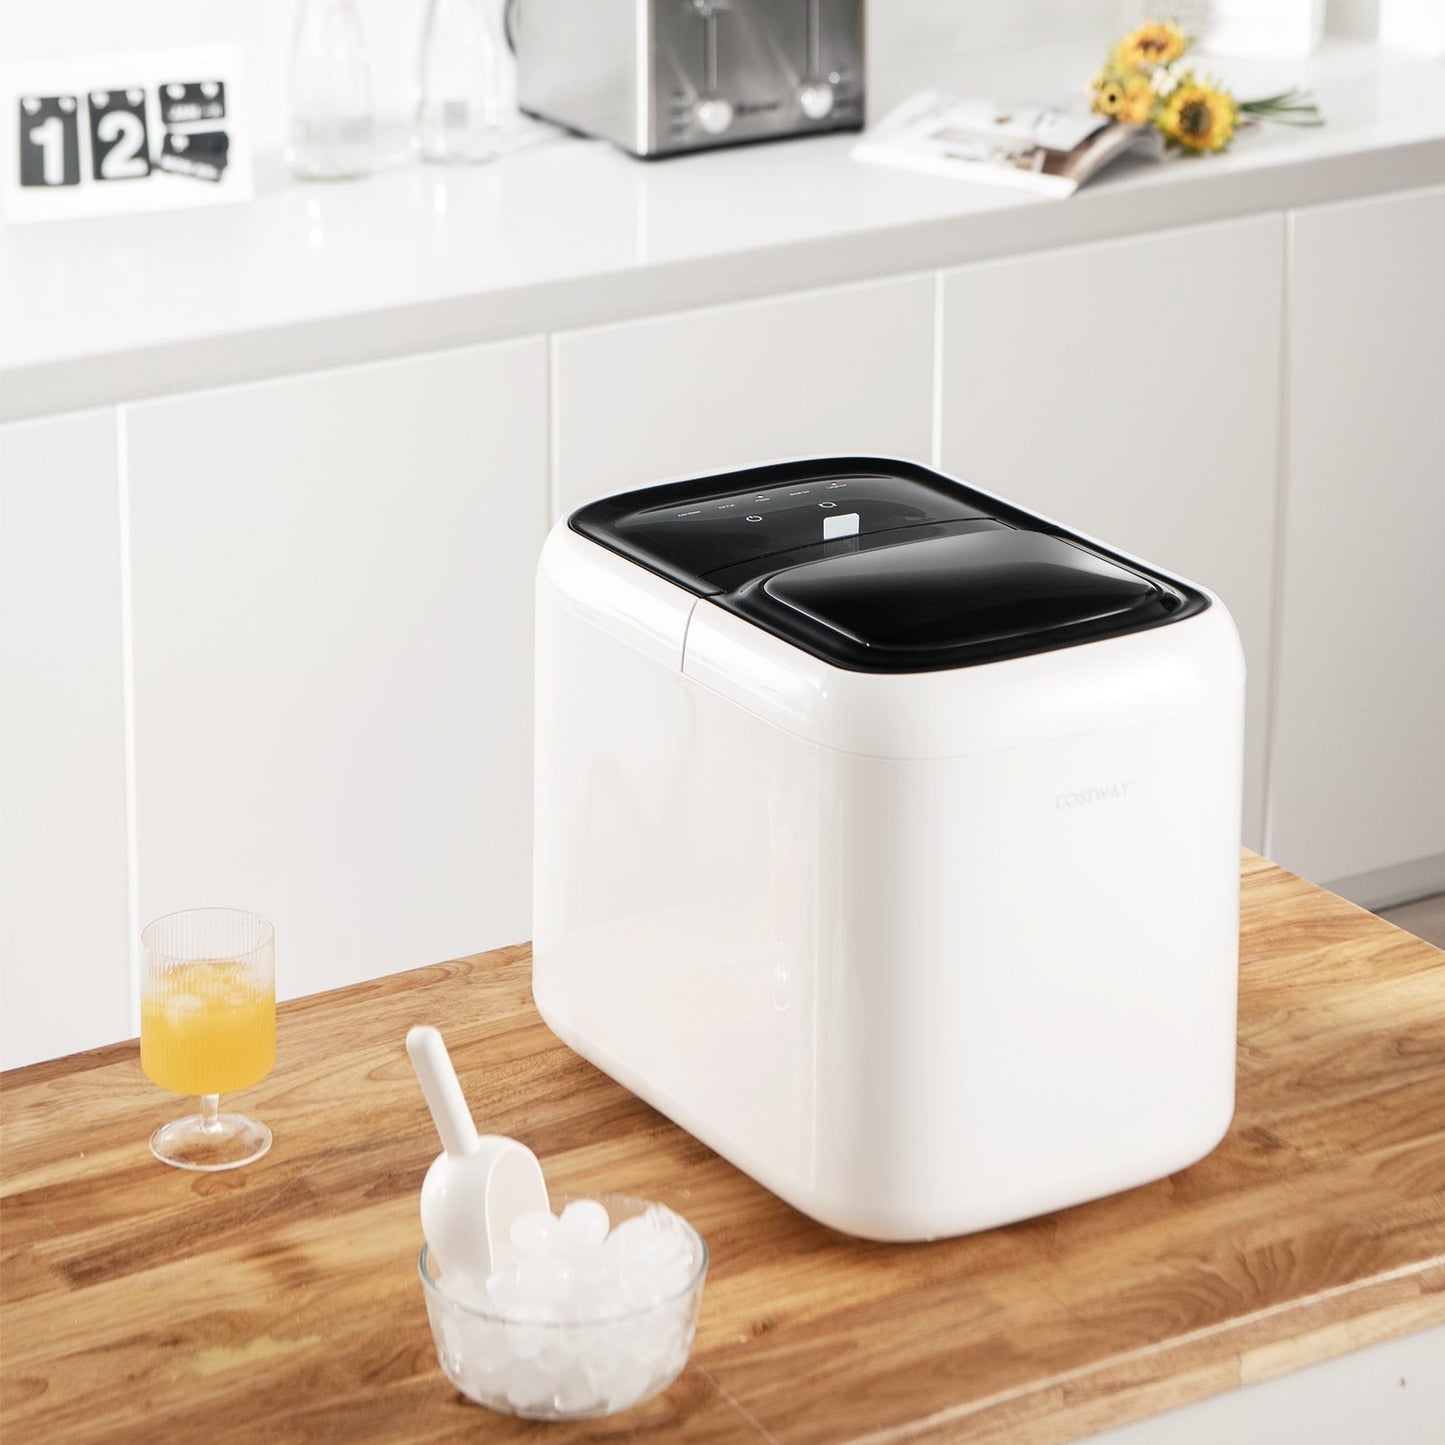 Portable Self-Clean Countertop Ice Maker with Ice Basket and Scoop, White